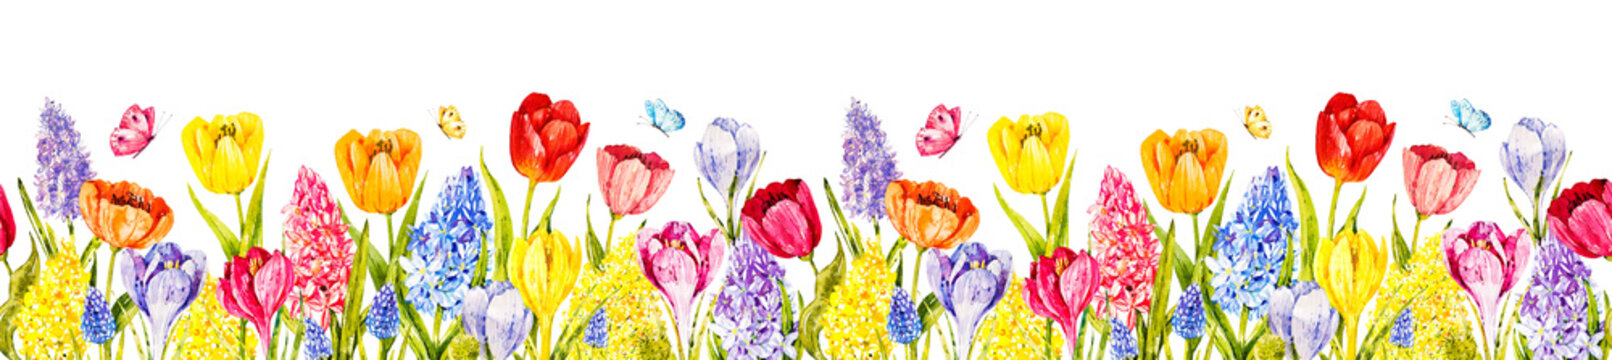 Watercolor seamless border with spring flowers: tulips, hyacinths, mimosa, crocuses, muscari, greenery, butterflies. Vintage flowers. Botanical hand drawn illustration. Garden summer flowers